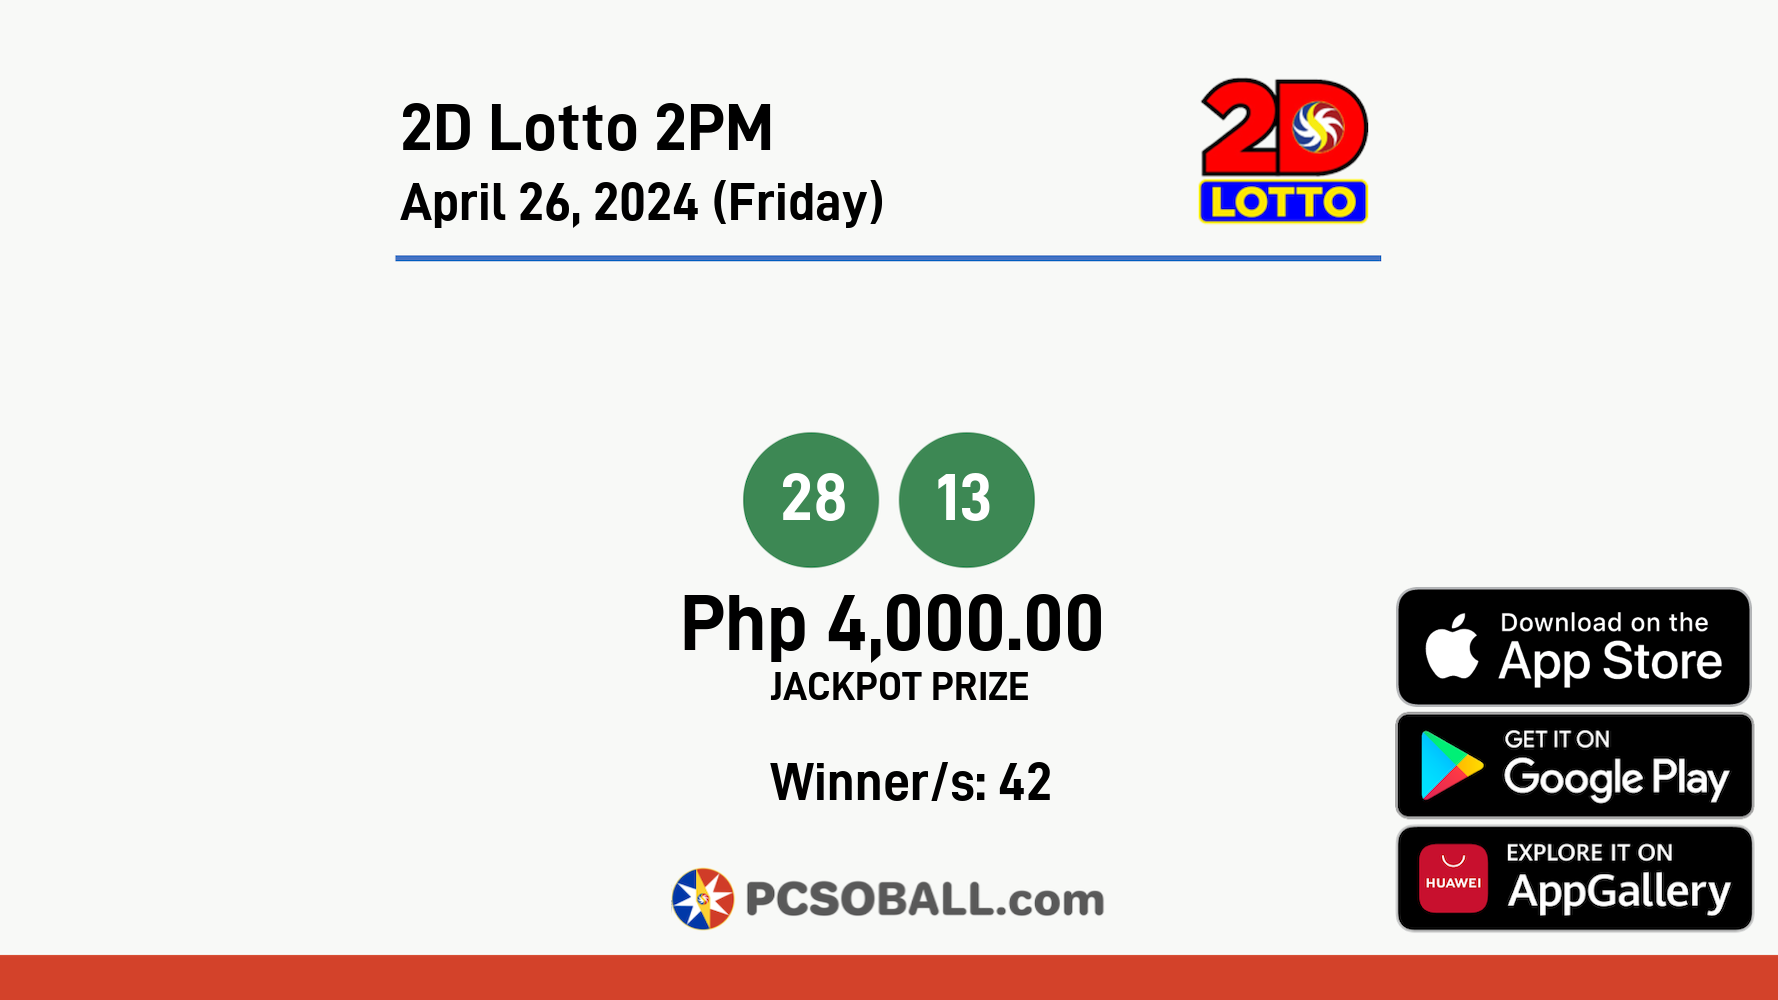 2D Lotto 2PM April 26, 2024 (Friday) Result